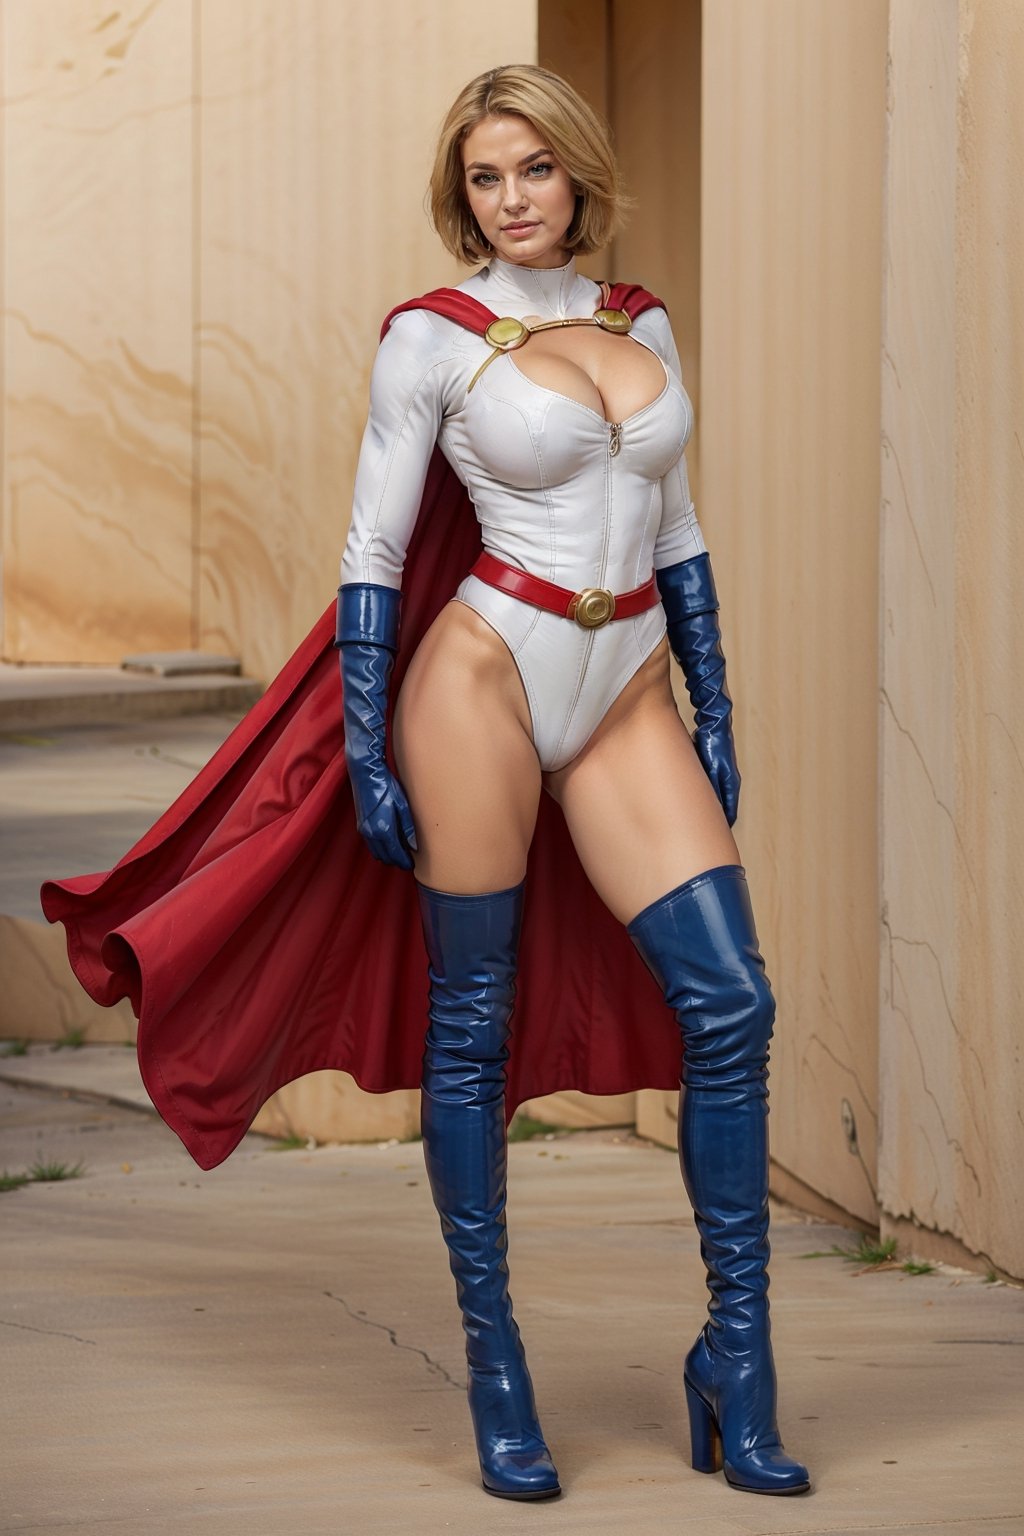 (Power girl:1.2), (power girl DC), (blonde hair), (bob cut), white latex, (elbow length gloves:1.2), cleavage, skin tight, (leotard), (cleavage hole), (cleavage circle), (boob window), (white latex), shiny, (green boots:1.2), (high-heel boots), (thigh high boots), (white leotard), (blue gloves:1.2), (red cape), (sash cape), (blue boots), (red belt:1.2), (Gigantic breasts), (gigantic cleavage), (muscular woman:1.2), (gigantic breasts), (huge breasts), high detail, long legs, (Gigantic breasts), (Massive breasts), (muscular woman:1.2), huge breasts, high detail, long legs, (athletic woman), (very tiny waist:1.4), Beautiful detailed face, best quality, (layered hair), tiny waist, firm lips, full lips, thin waist, Big breasts, sanpaku eyes, high resolution, high quality, Hair over eyes, ,powergirl